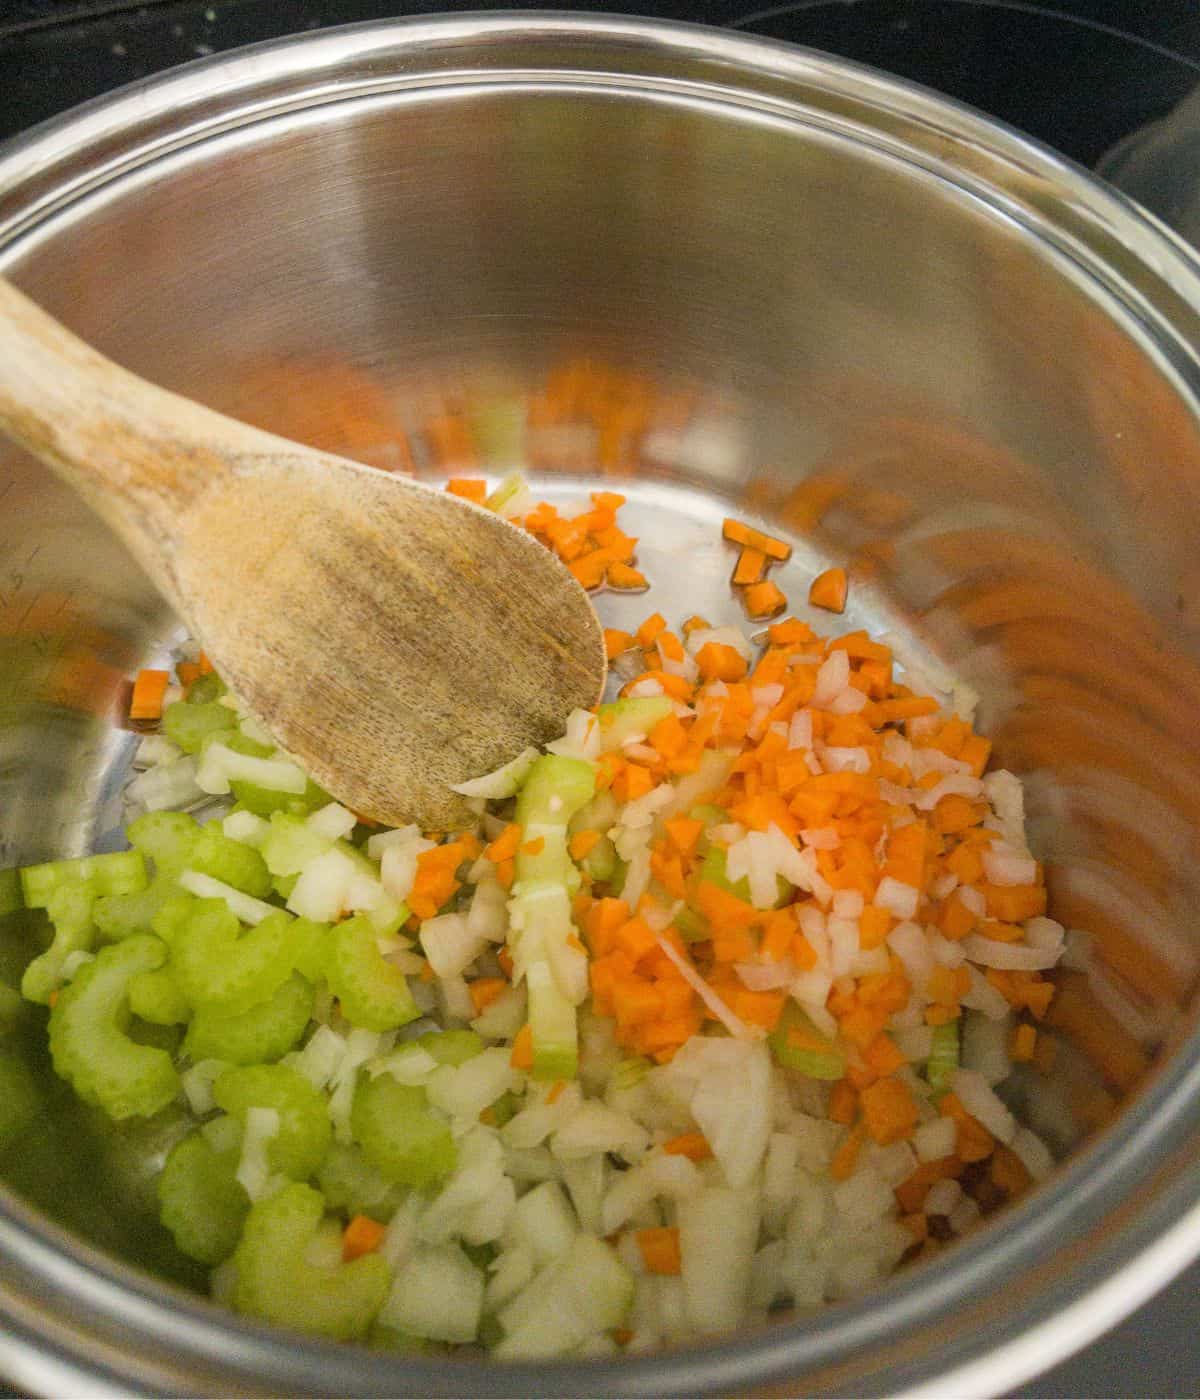 garlic, celery, onion and carrot cooking in a saucepan being stirred with a wooden spoon.